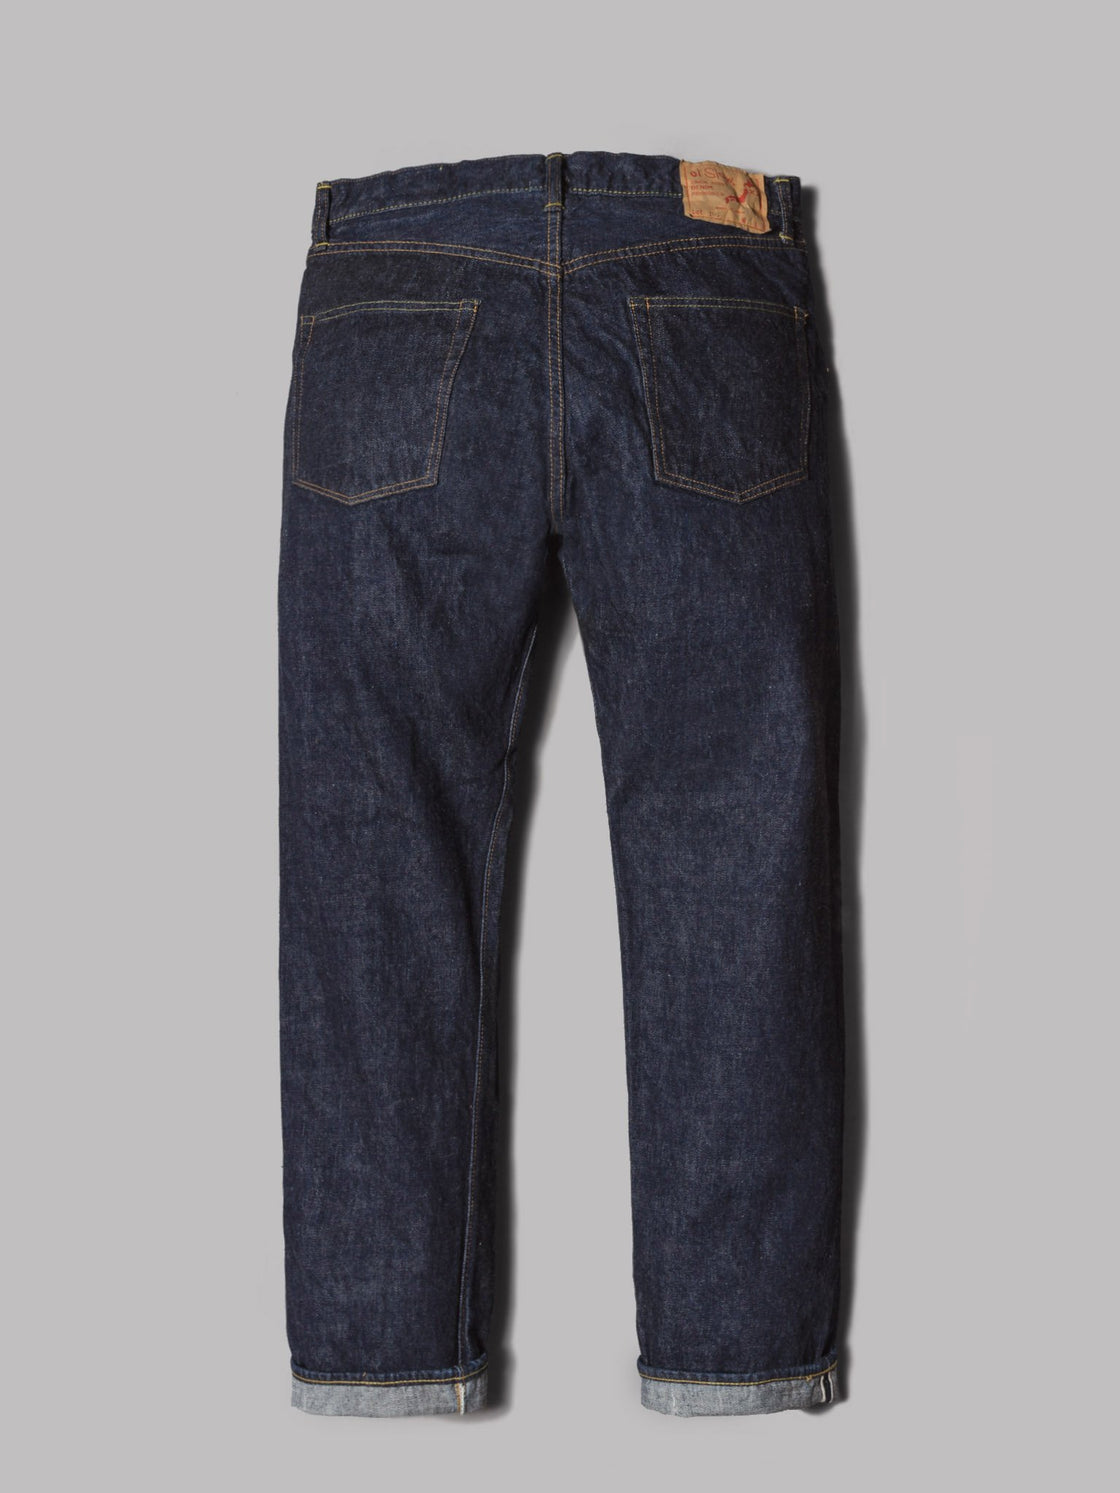 orSlow 105 Standard Fit Jeans (One Wash 